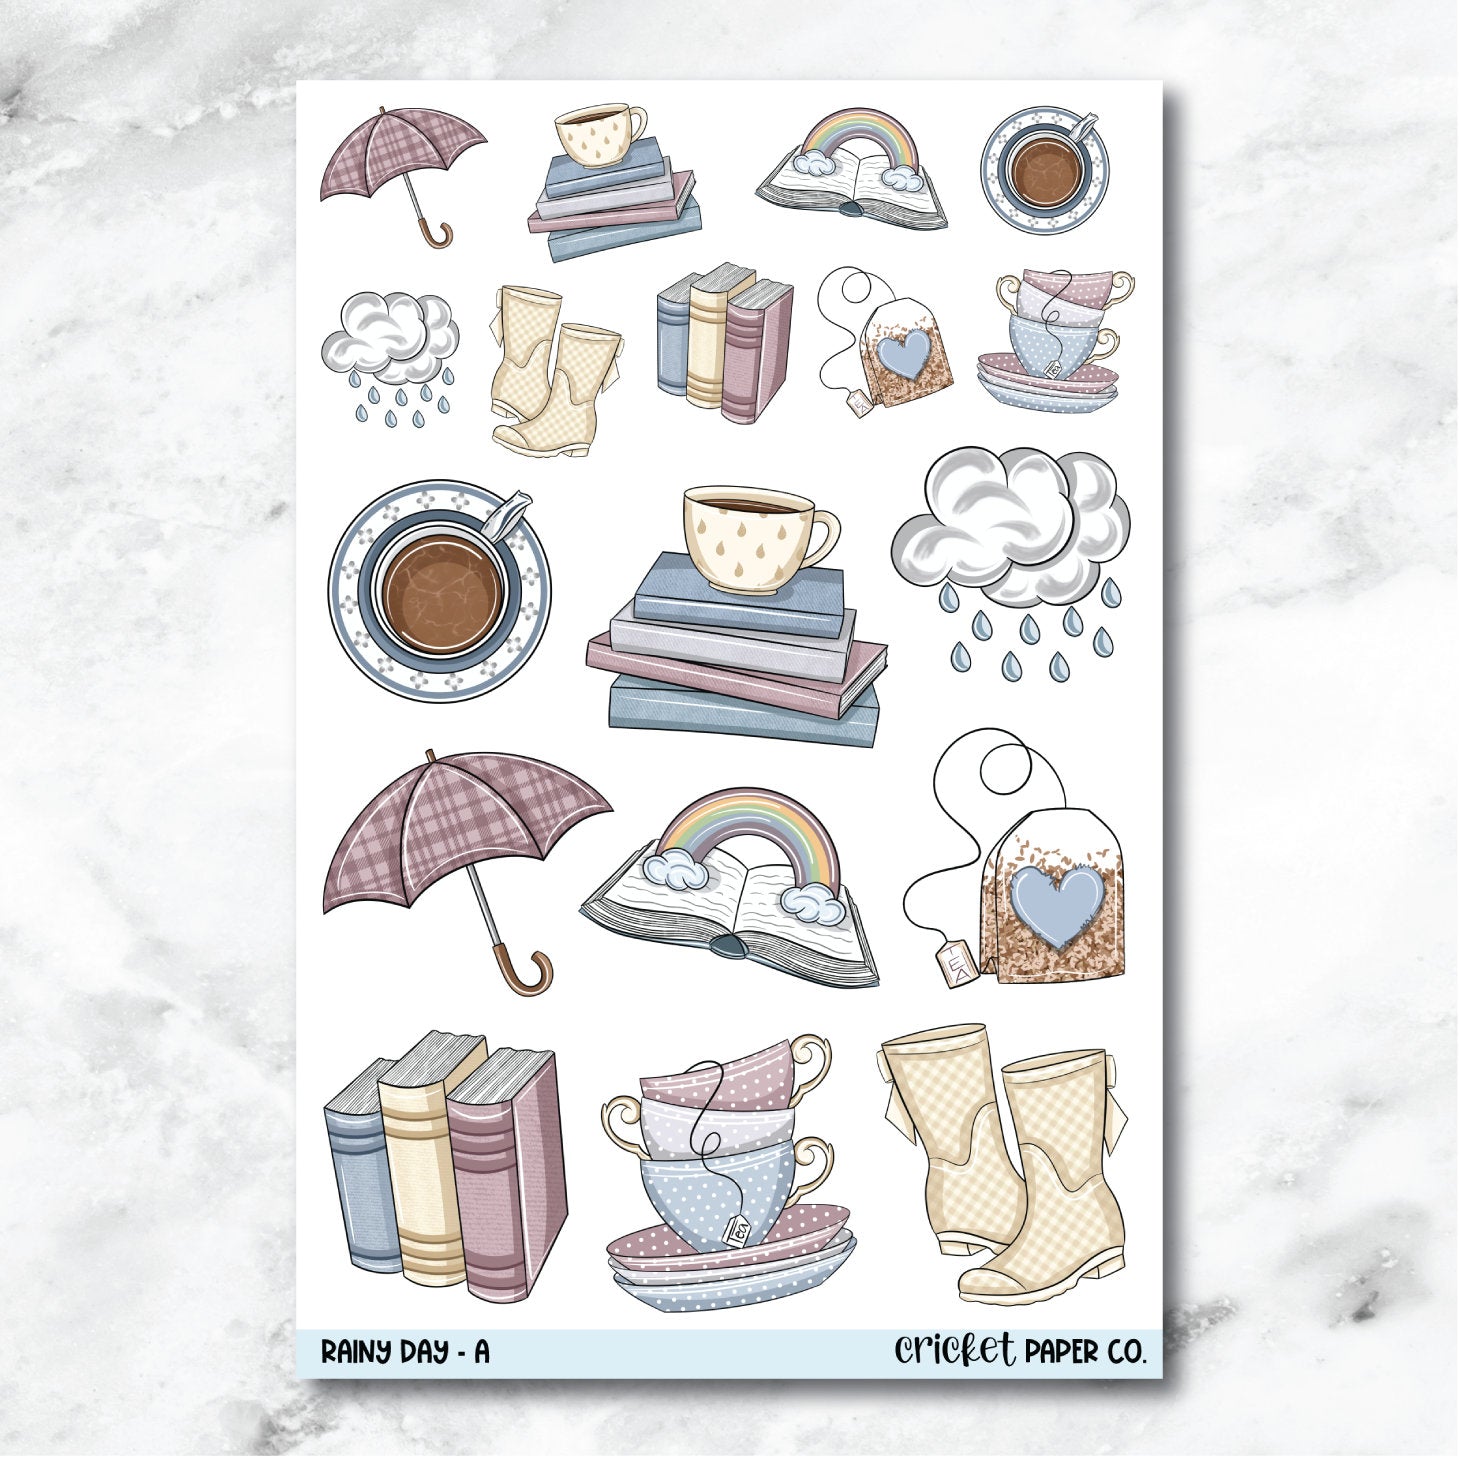 Rainy Day Decorative Journaling and Planner Stickers - A-Cricket Paper Co.